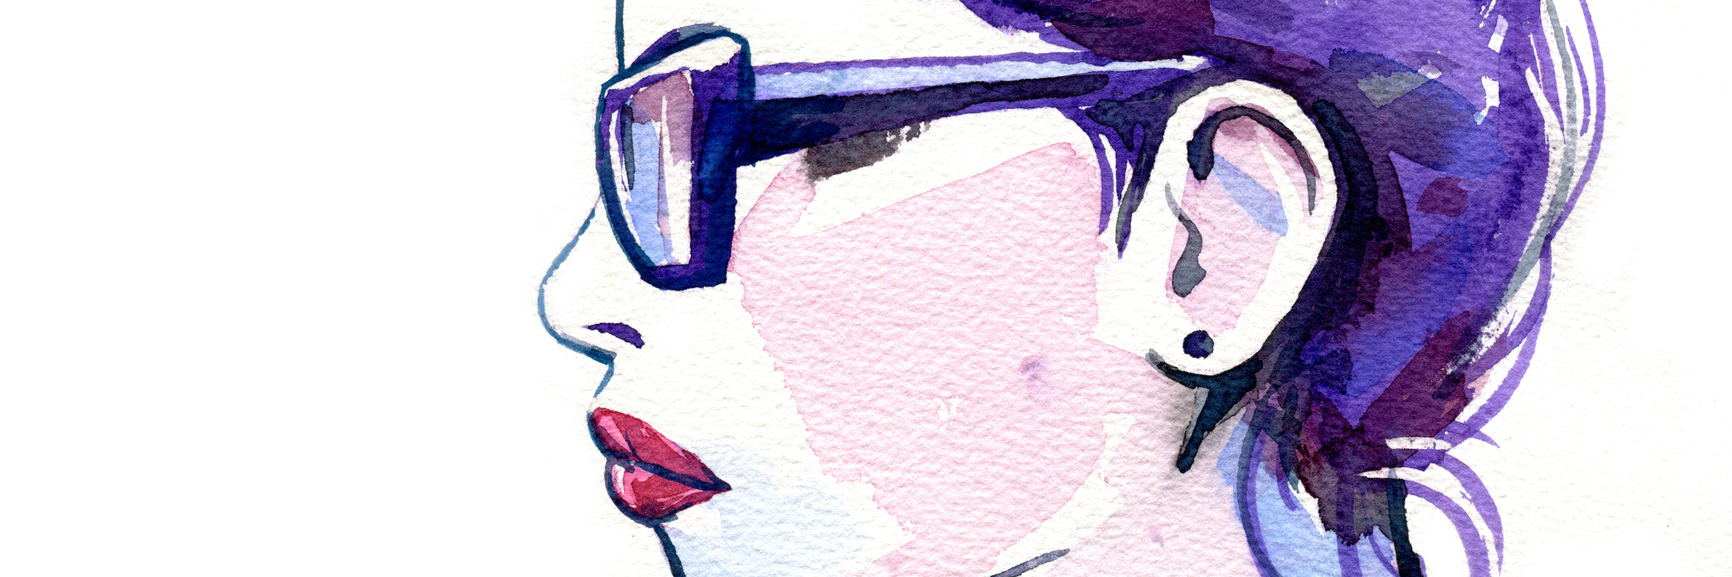 watercolor painting of a woman with sunglasses